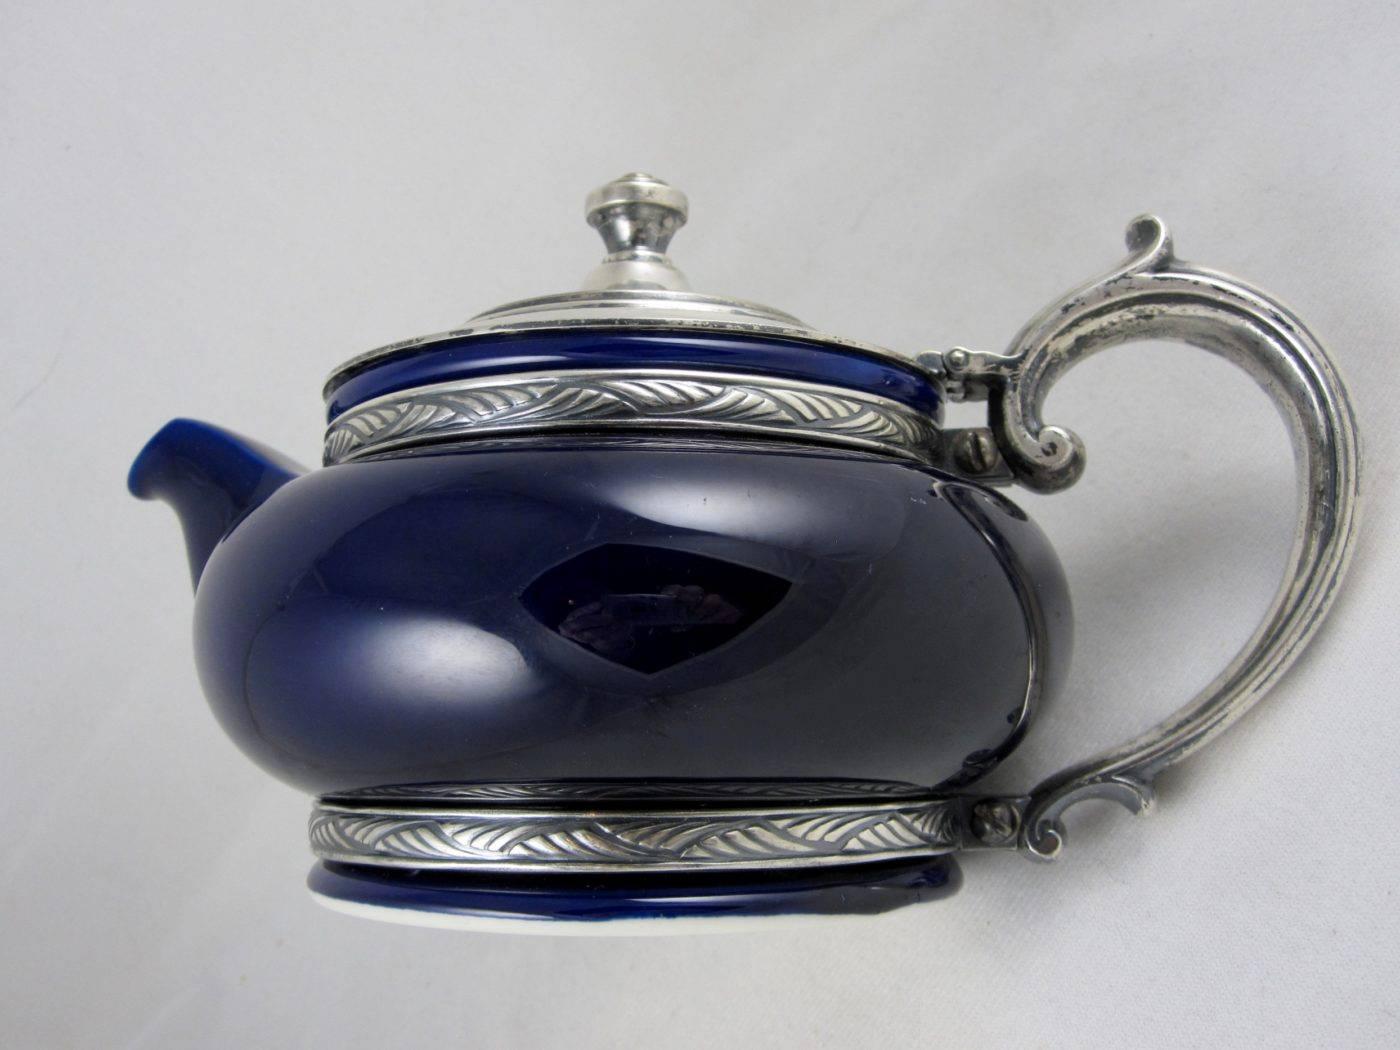 A 1920s hotel teapot, an American collaboration by Lenox and Reed & Barton. Sized to hold two cups of perfectly brewed tea, the cobalt blue ceramic pot is braced in a silver soldered, silver plate holder of a base, handle and a lid with Art Deco